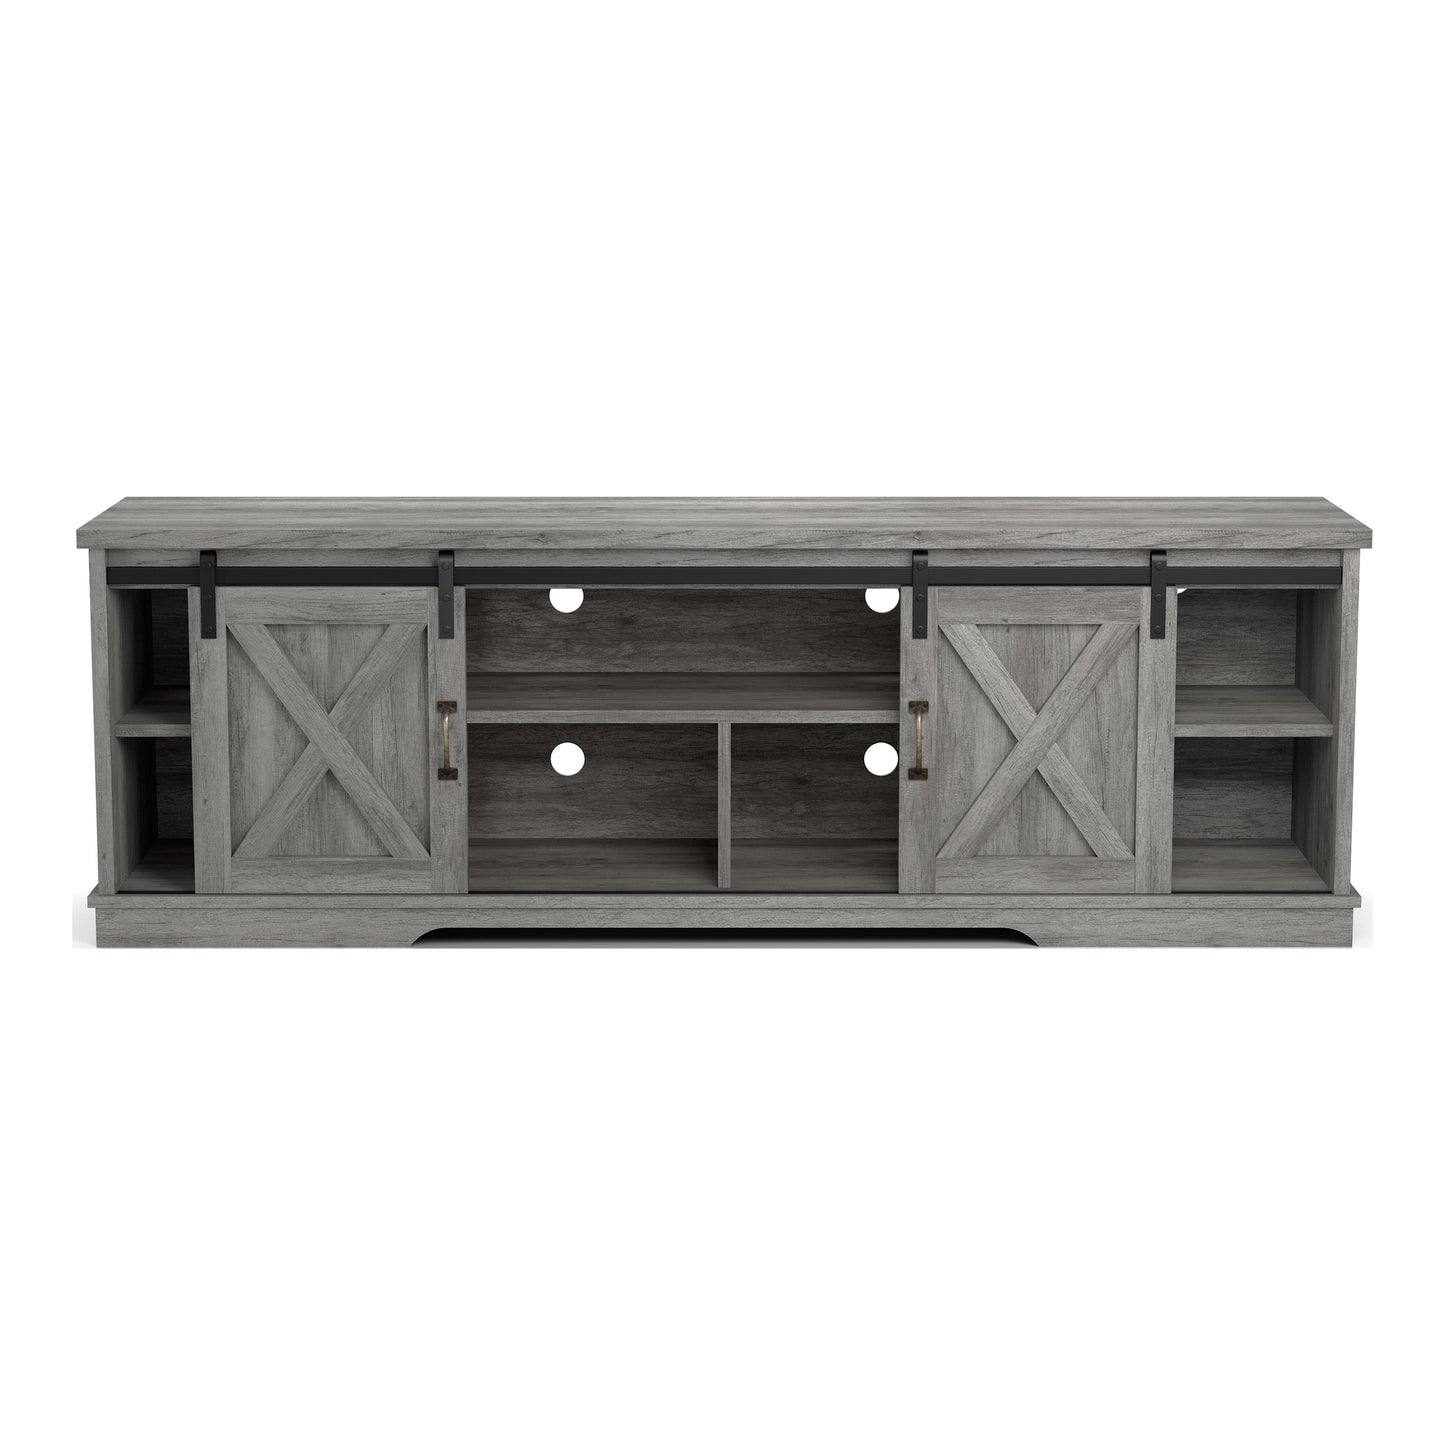 Front-facing stand with sliding doors only from a three-piece rustic vintage gray oak TV stand and pier entertainment set on a white background